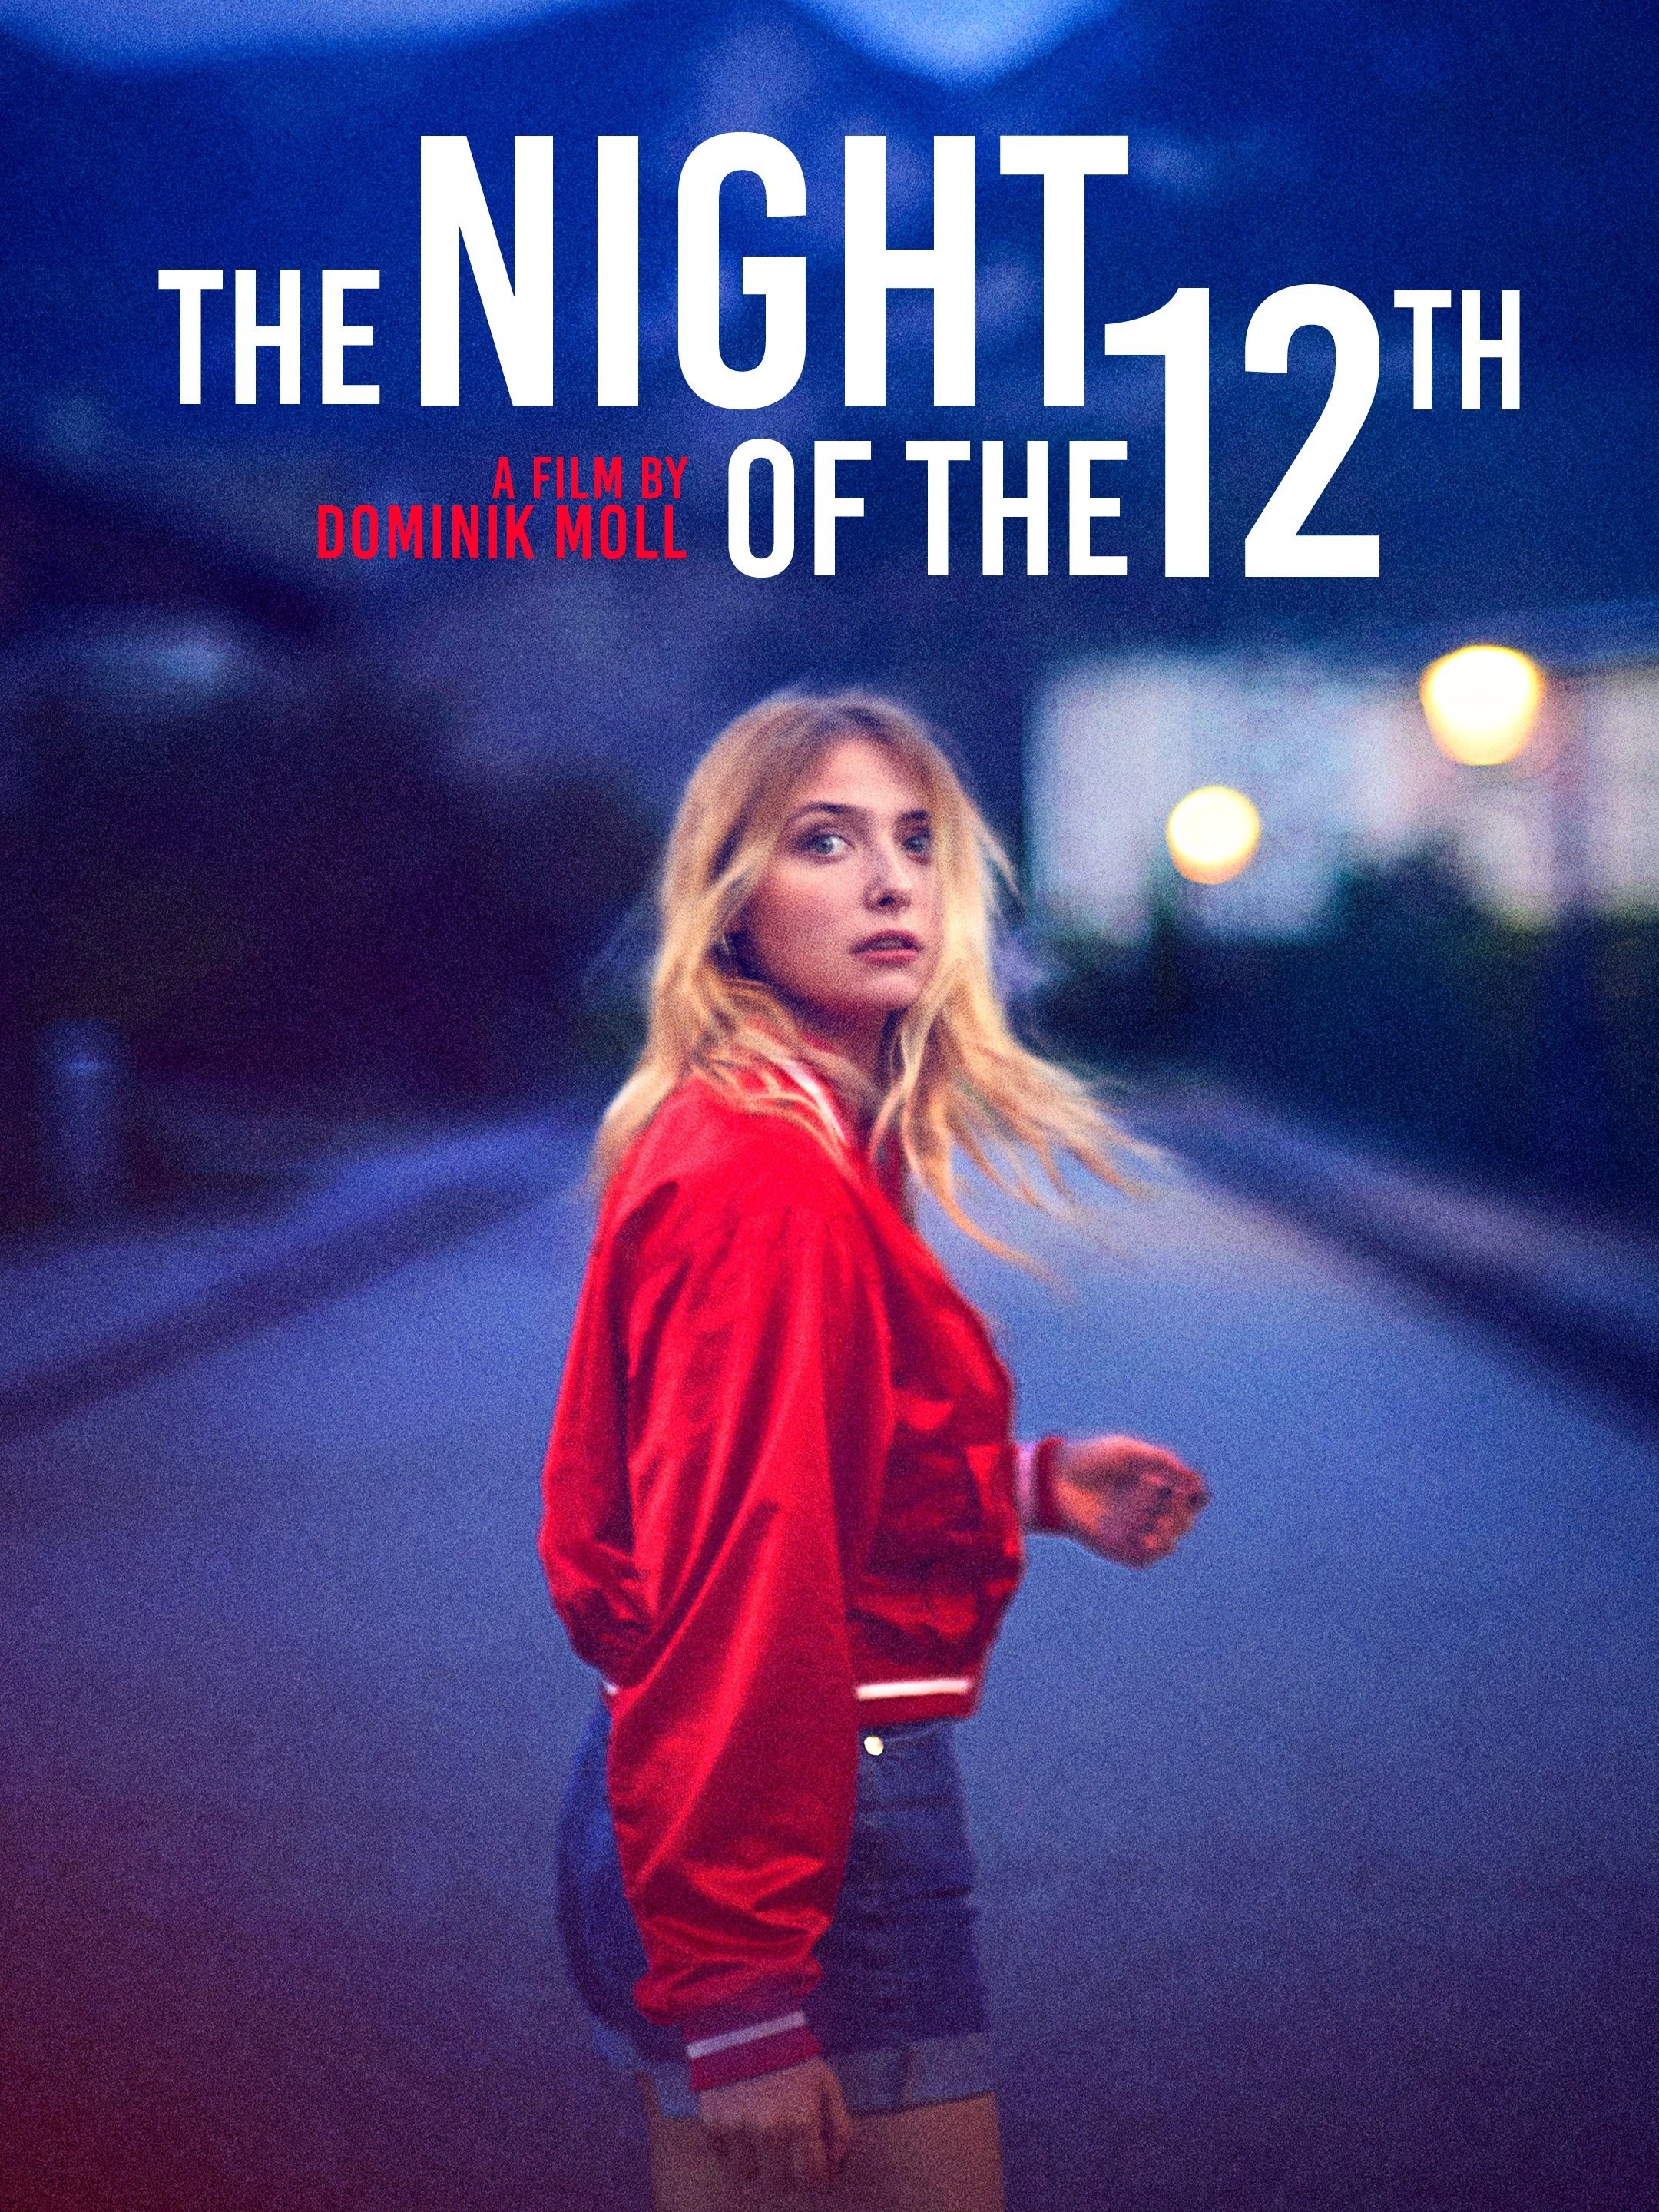 Review: Till the End of the Night - Cineuropa